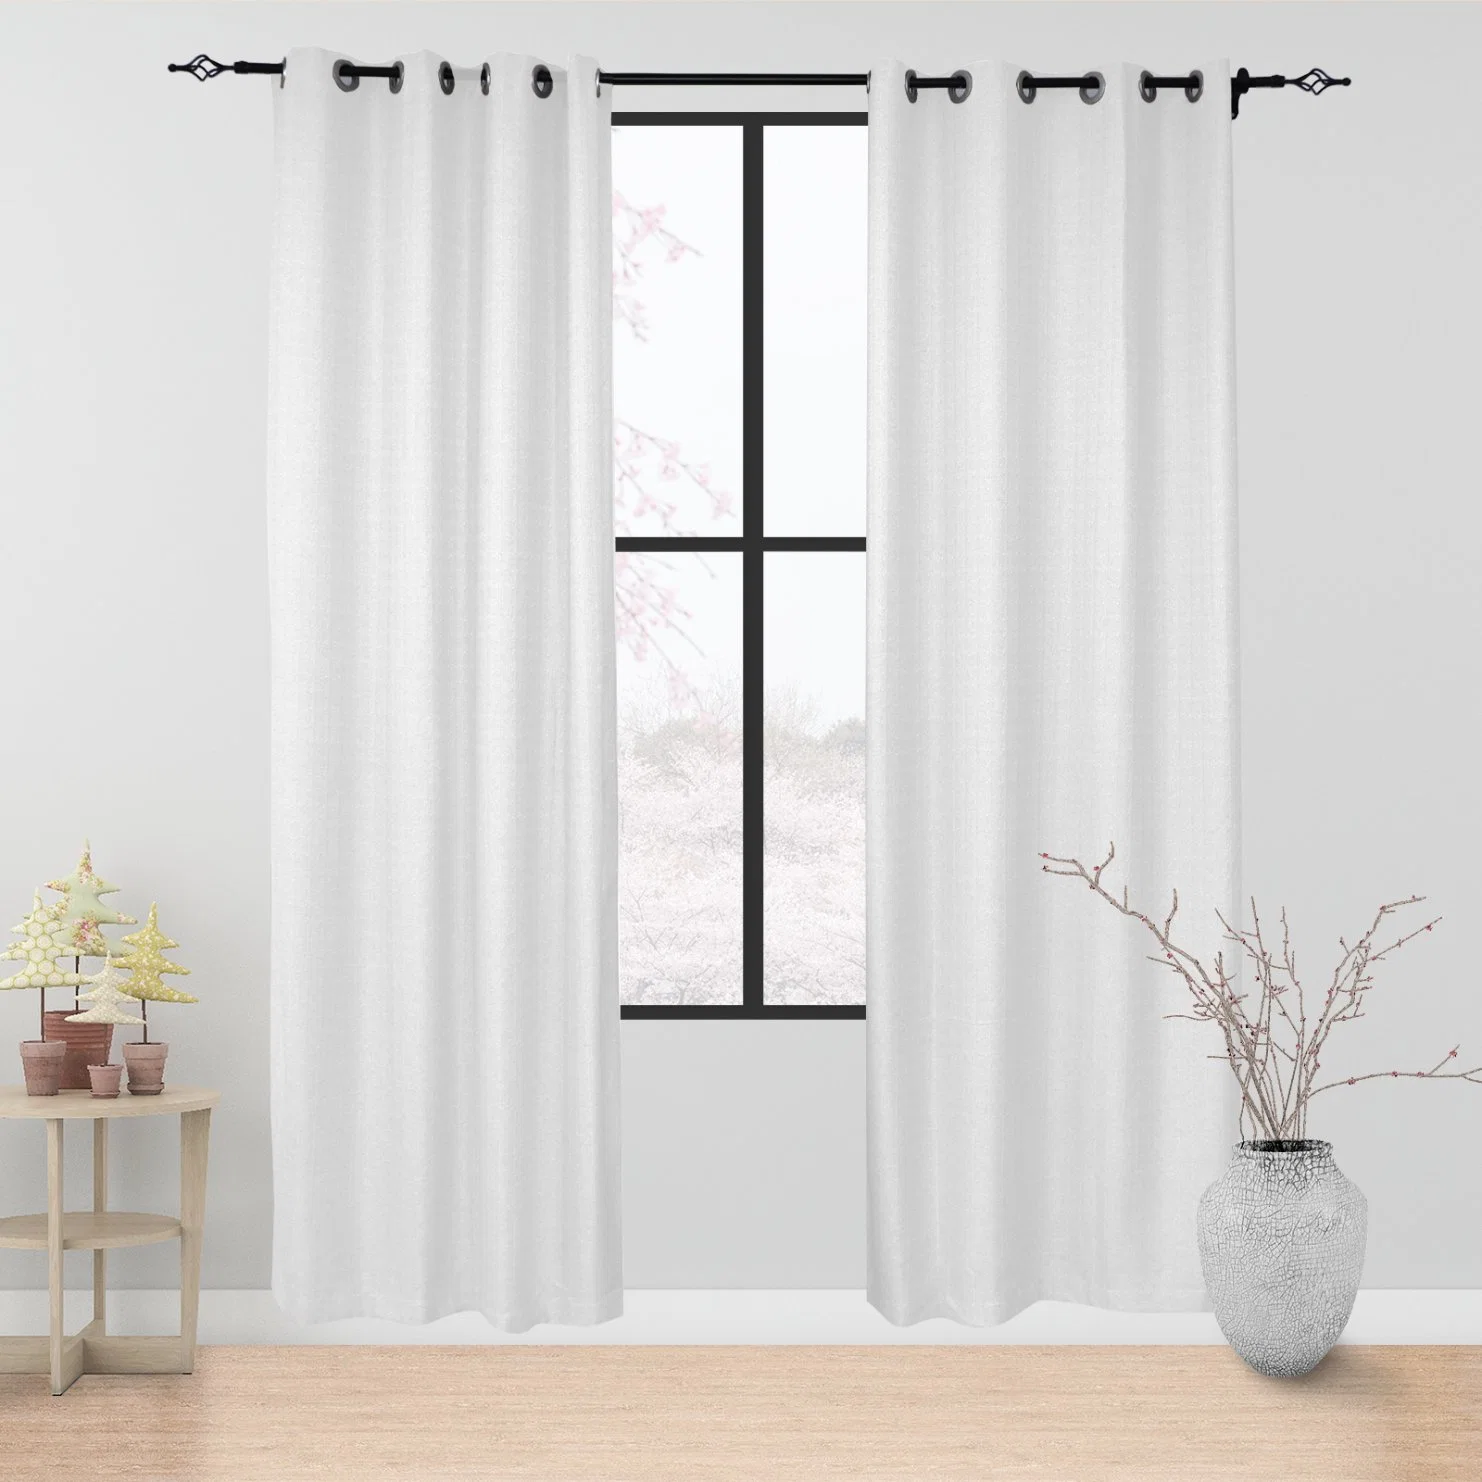 Plain Shading Curtain Finished Product Modern Simple Cotton Linen Curtain Cloth Living Room Bedroom Balcony Curtain